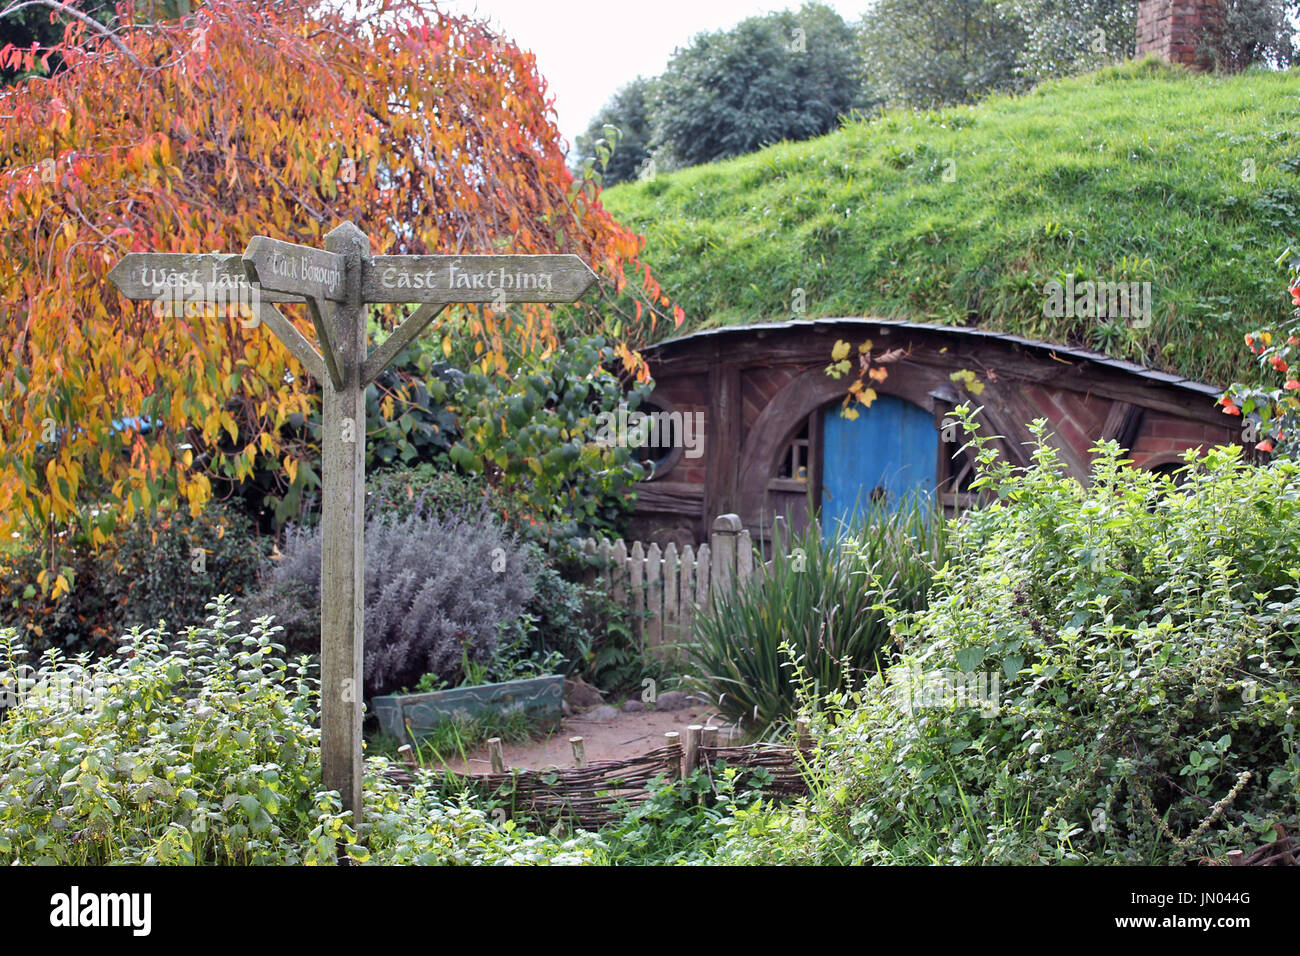 A Hobbit House from the Hobbiton Movie Set, as featured in the movie Lord of The Rings. Stock Photo